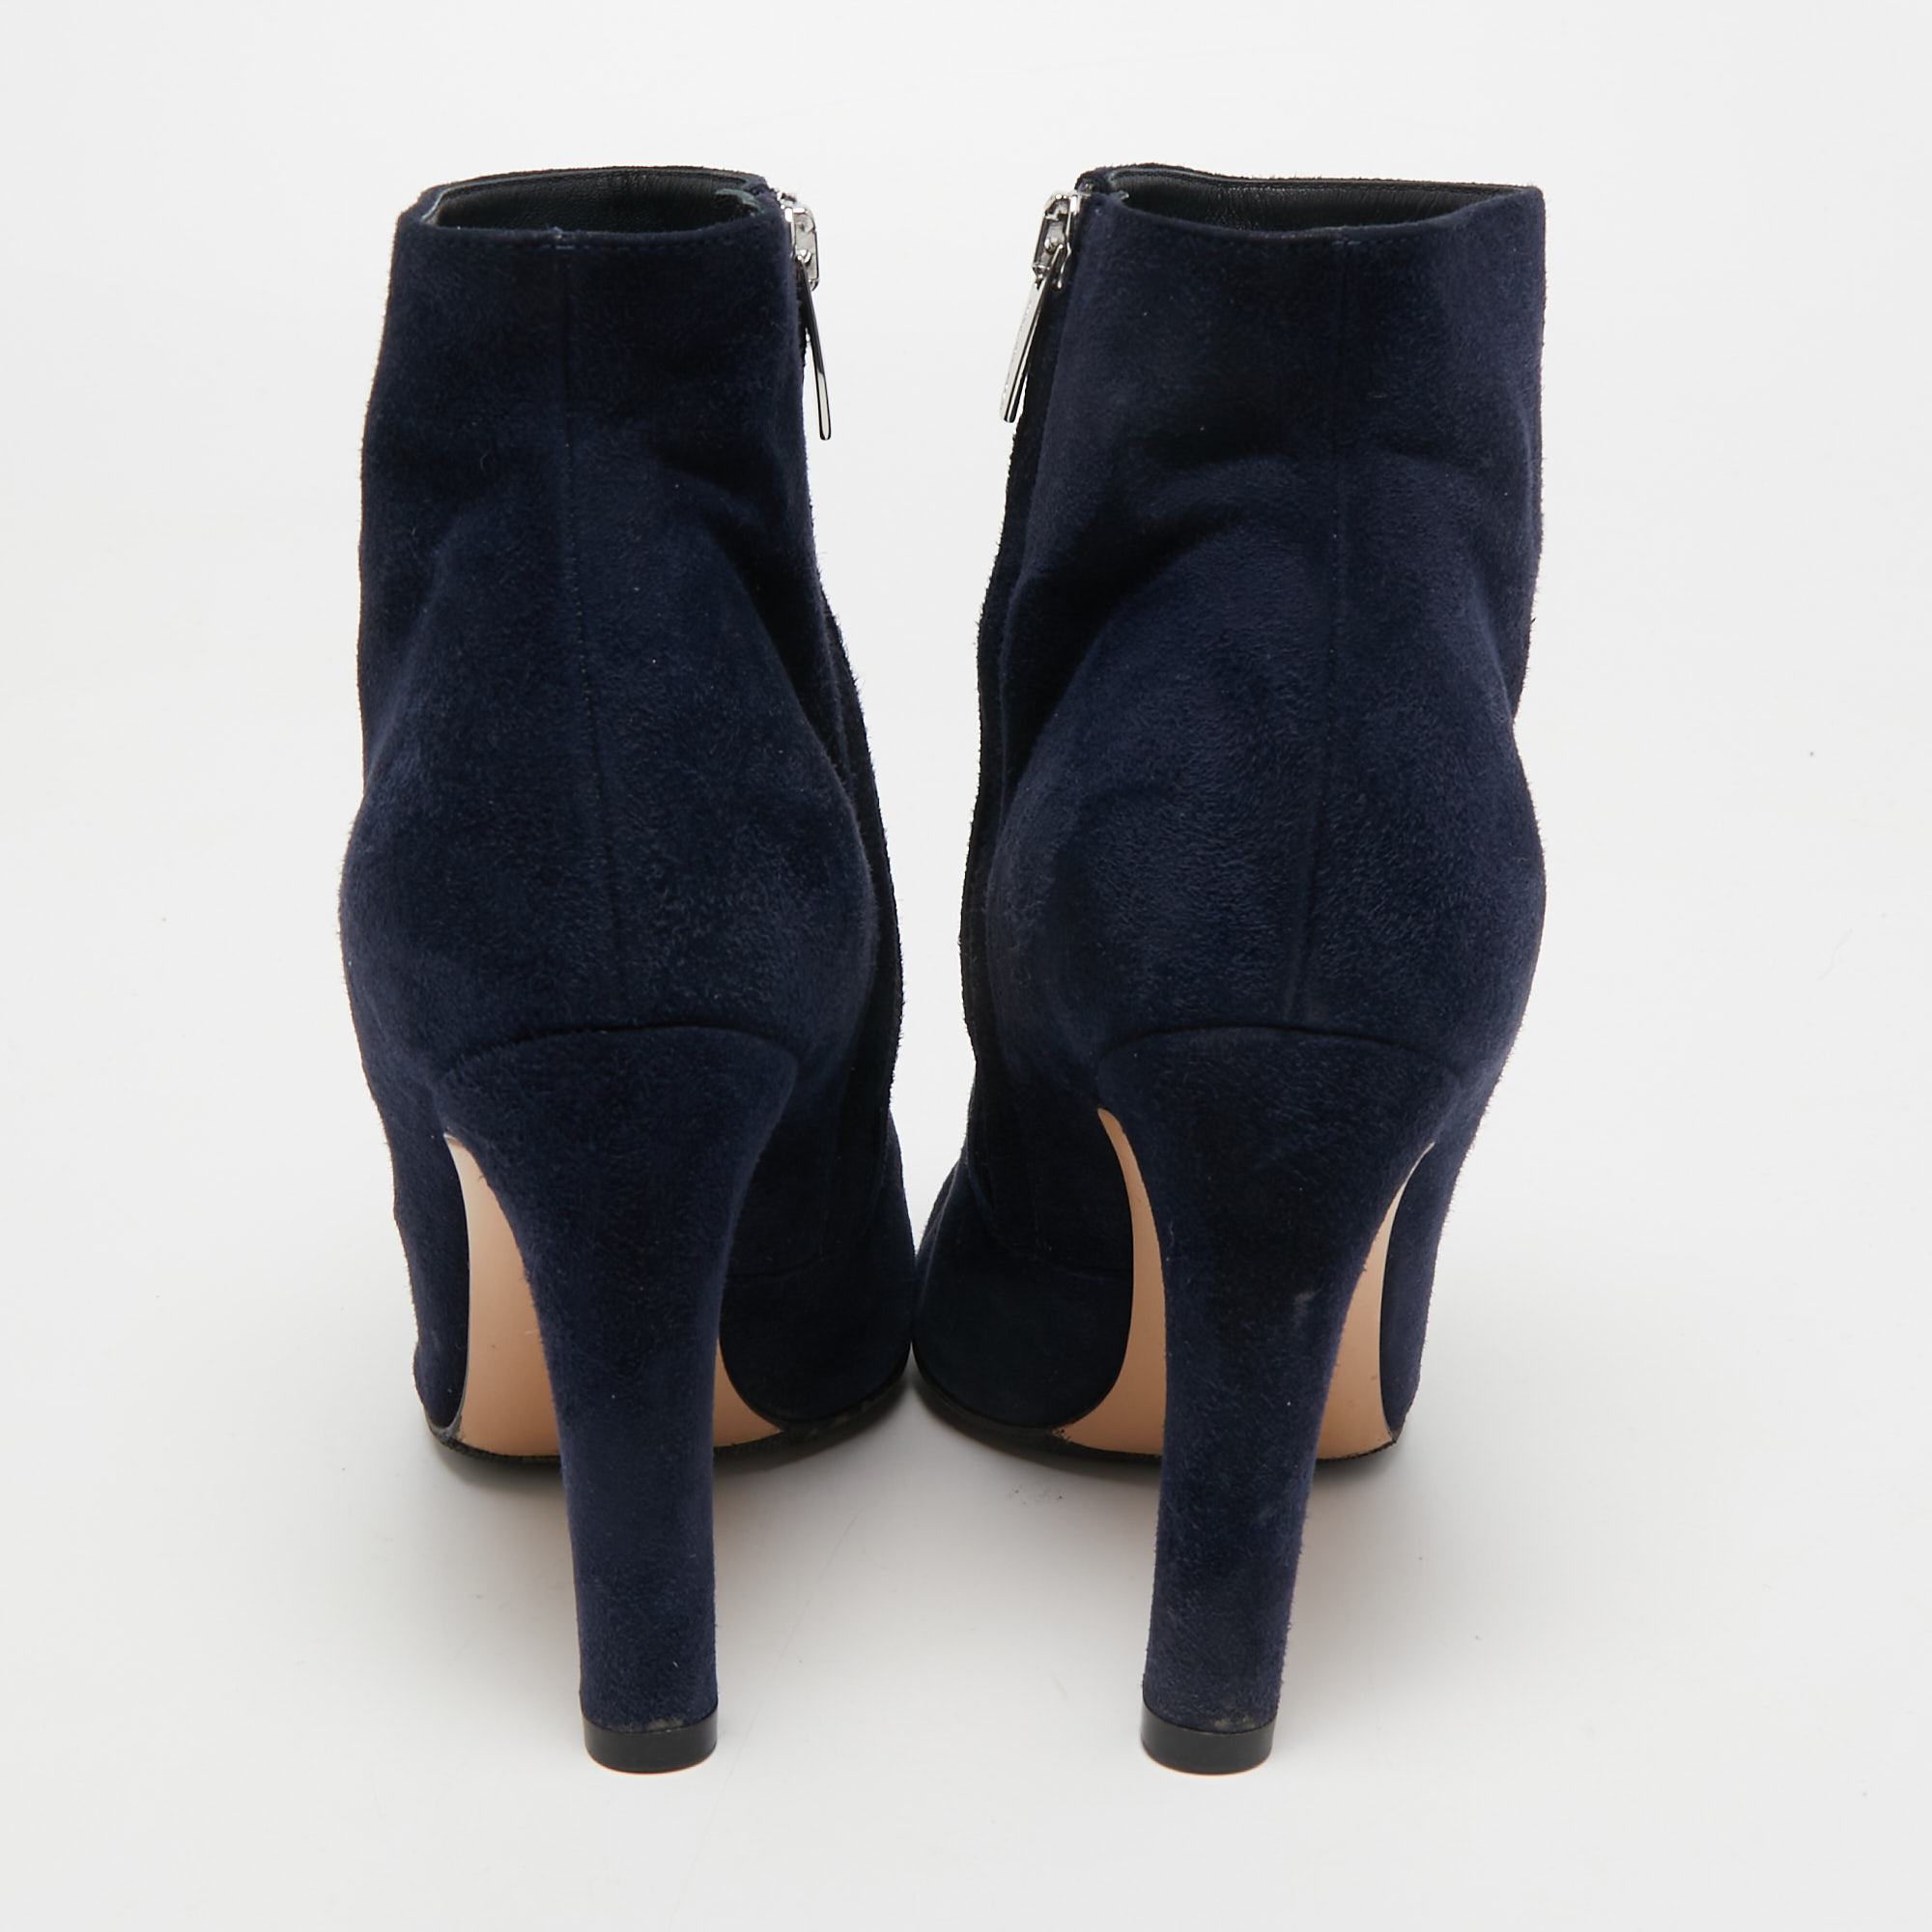 Gianvito Rossi Navy Blue Suede Ankle Booties Size 37